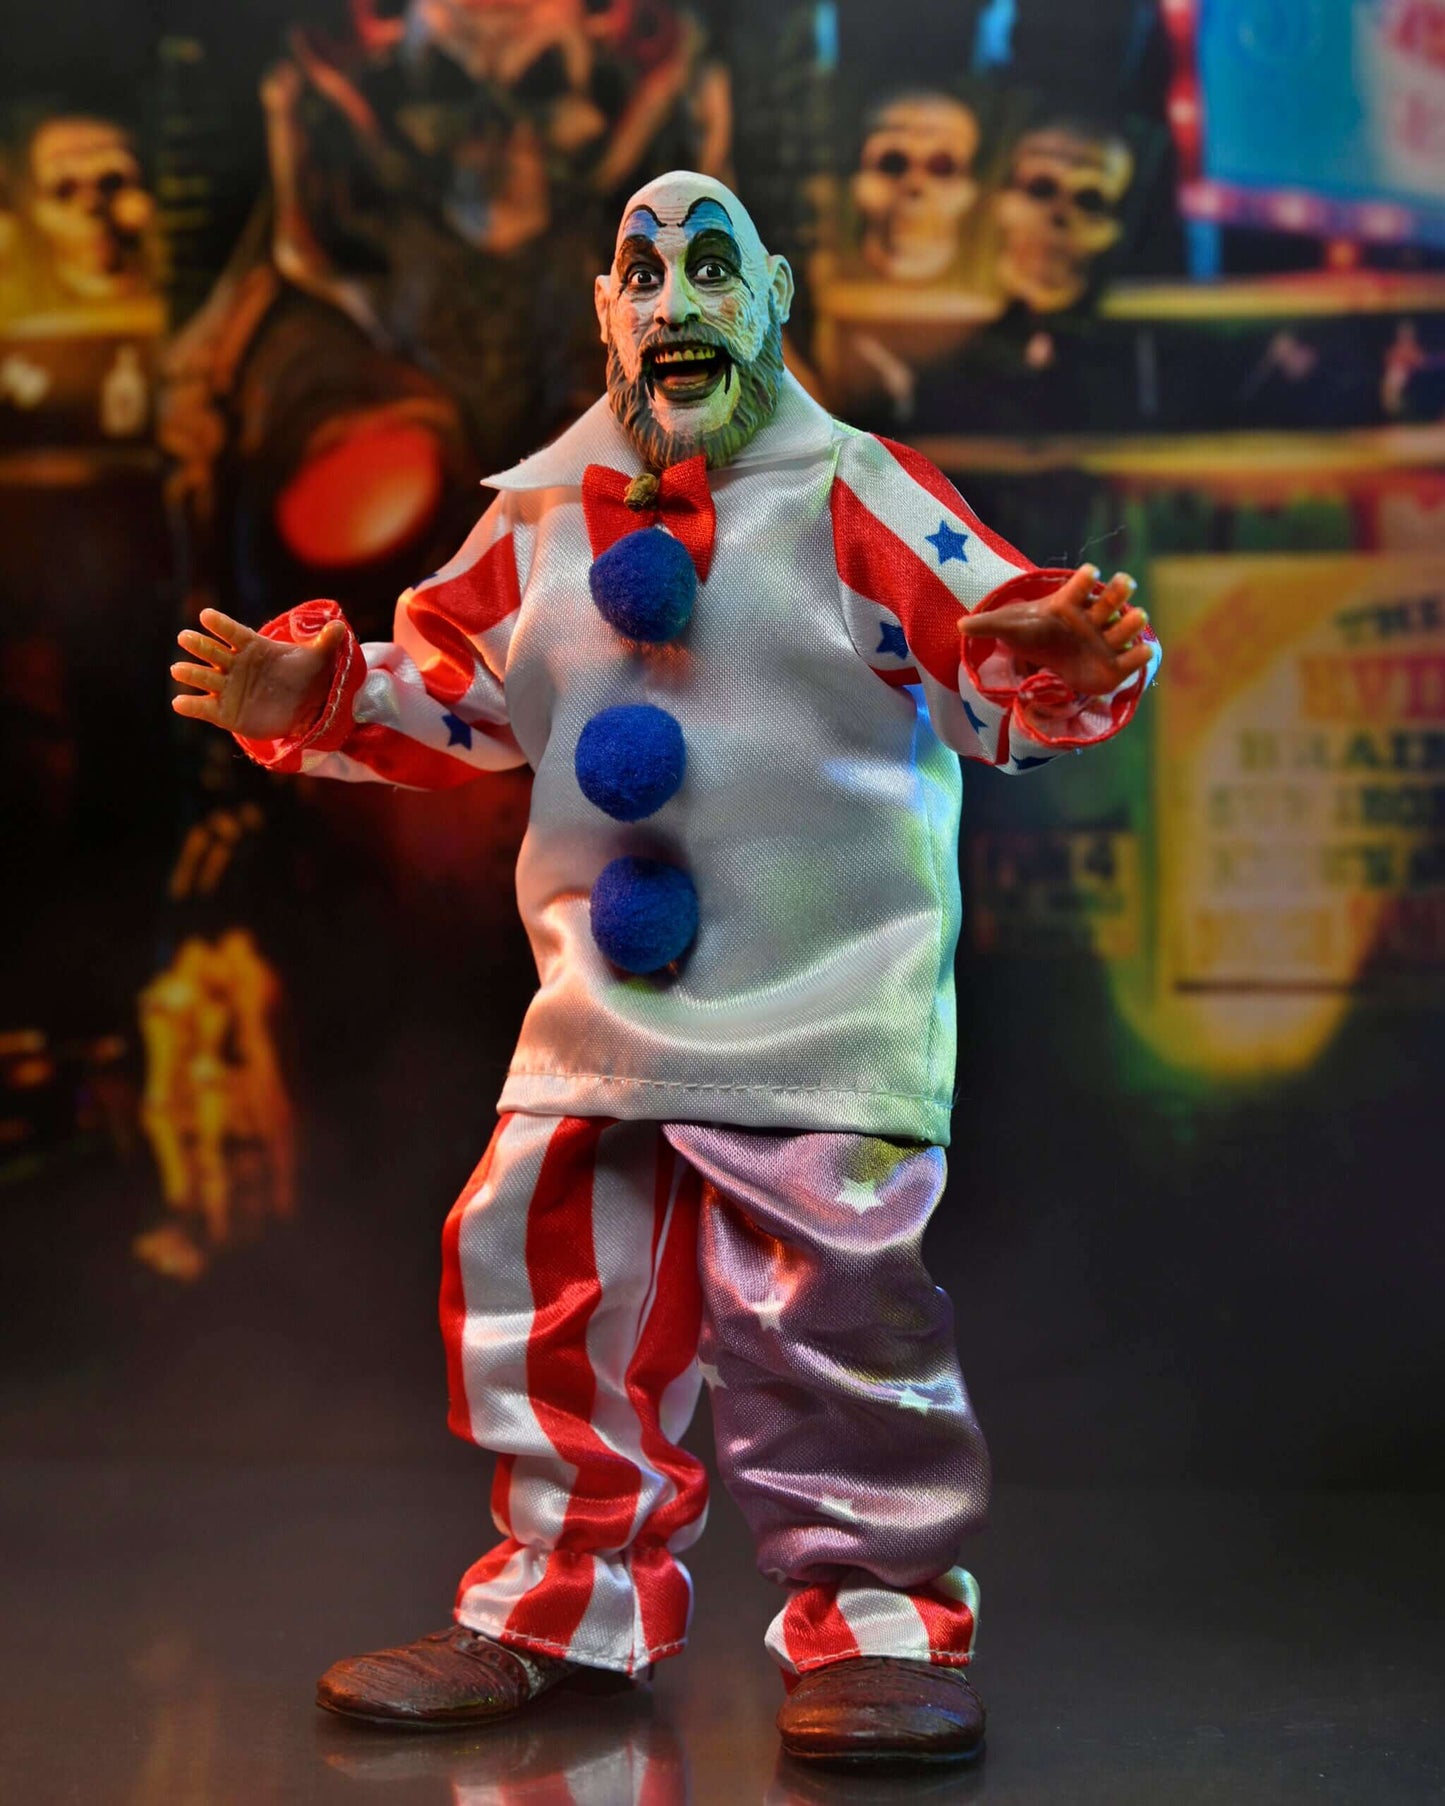 House of 1000 Corpses – 20th Anniversary

8” Clothed Action Figure – Captain Spaulding